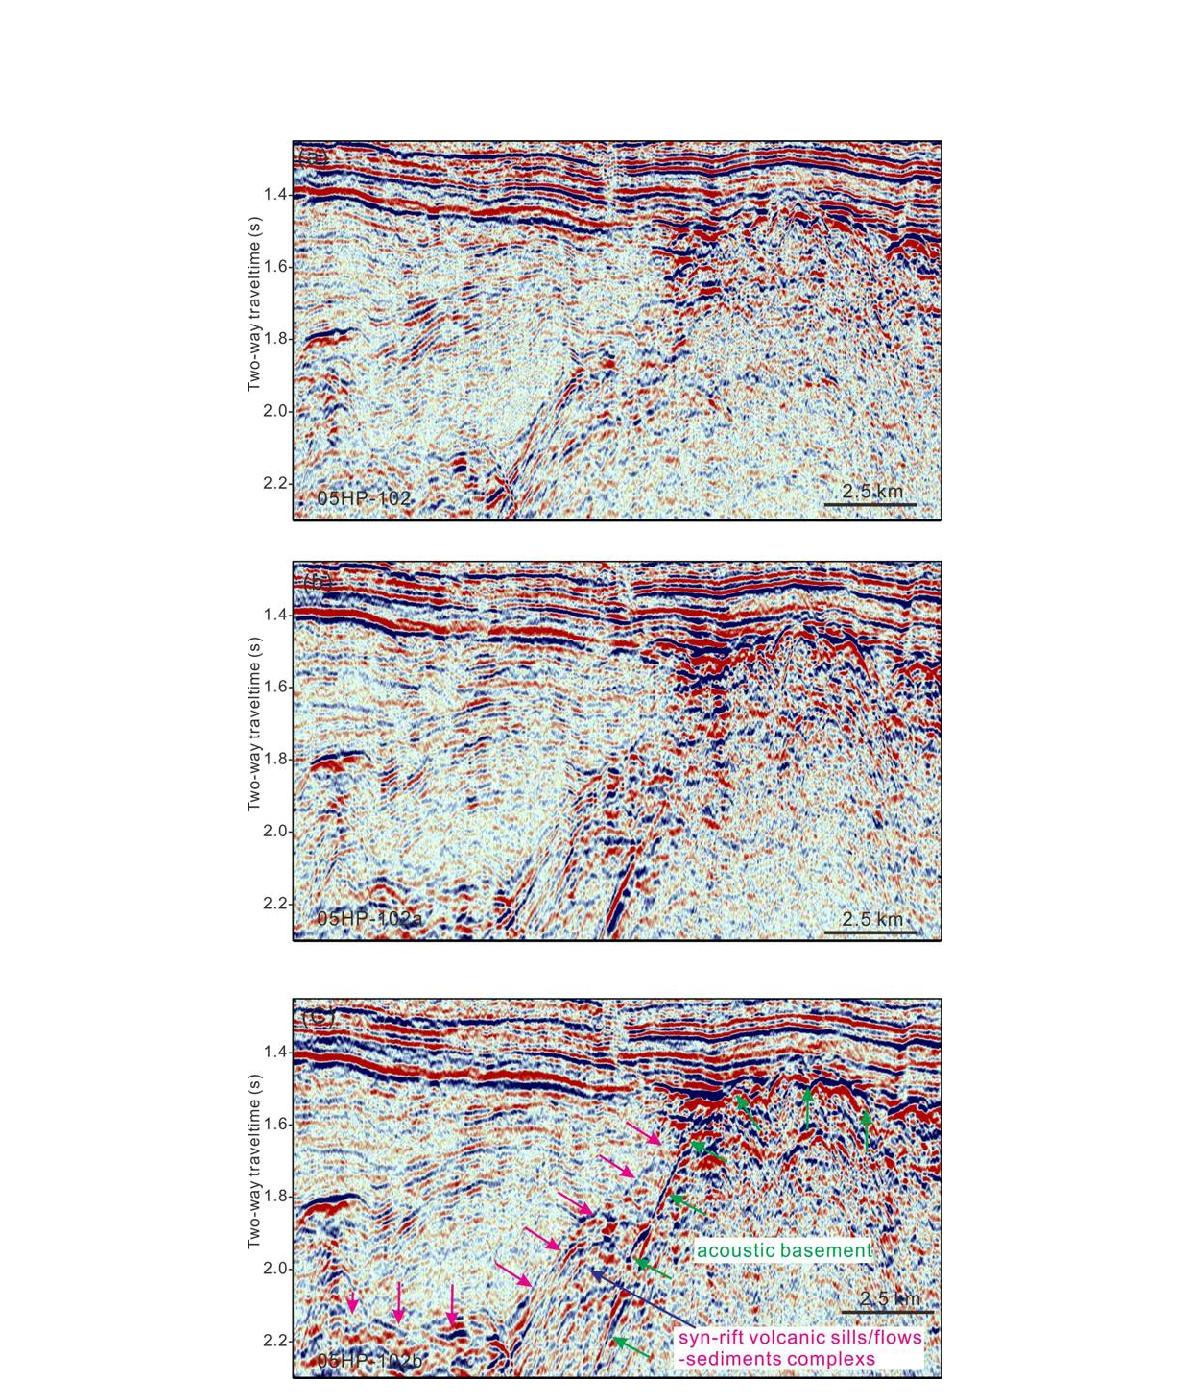 Seismic profiles of the normal acquisition(a), slanted#1(b) and curved#1(c).